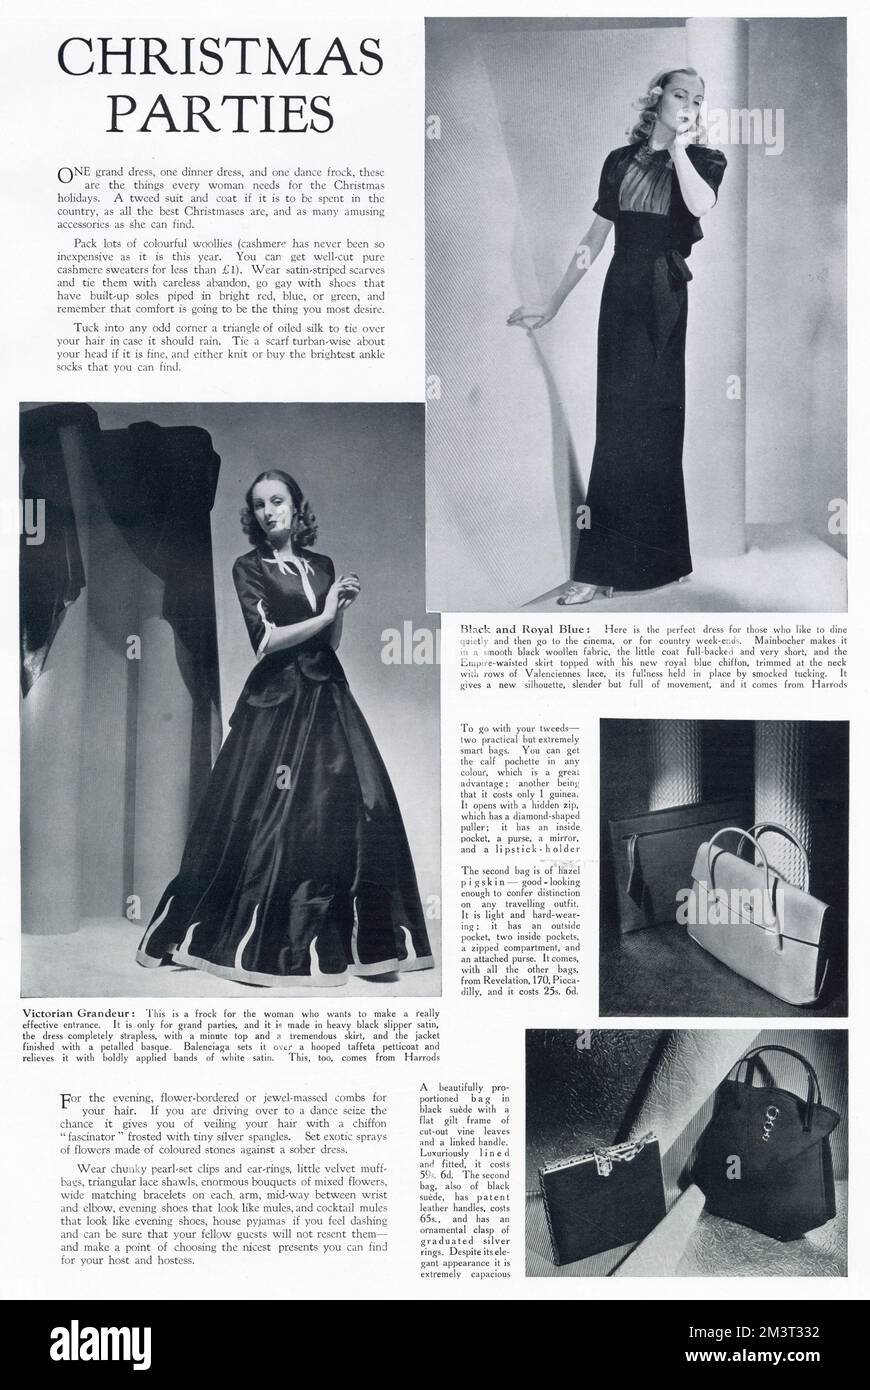 A frock for grand parties by Balenciaga of heavy black, slipper satin. The dress is strapless with a minute top and tremendous skirt. The over jacket is finished with a petalled basque. The skirt, worn over a hopped taffeta petticoat, has boldly applied white satin. Stock Photo